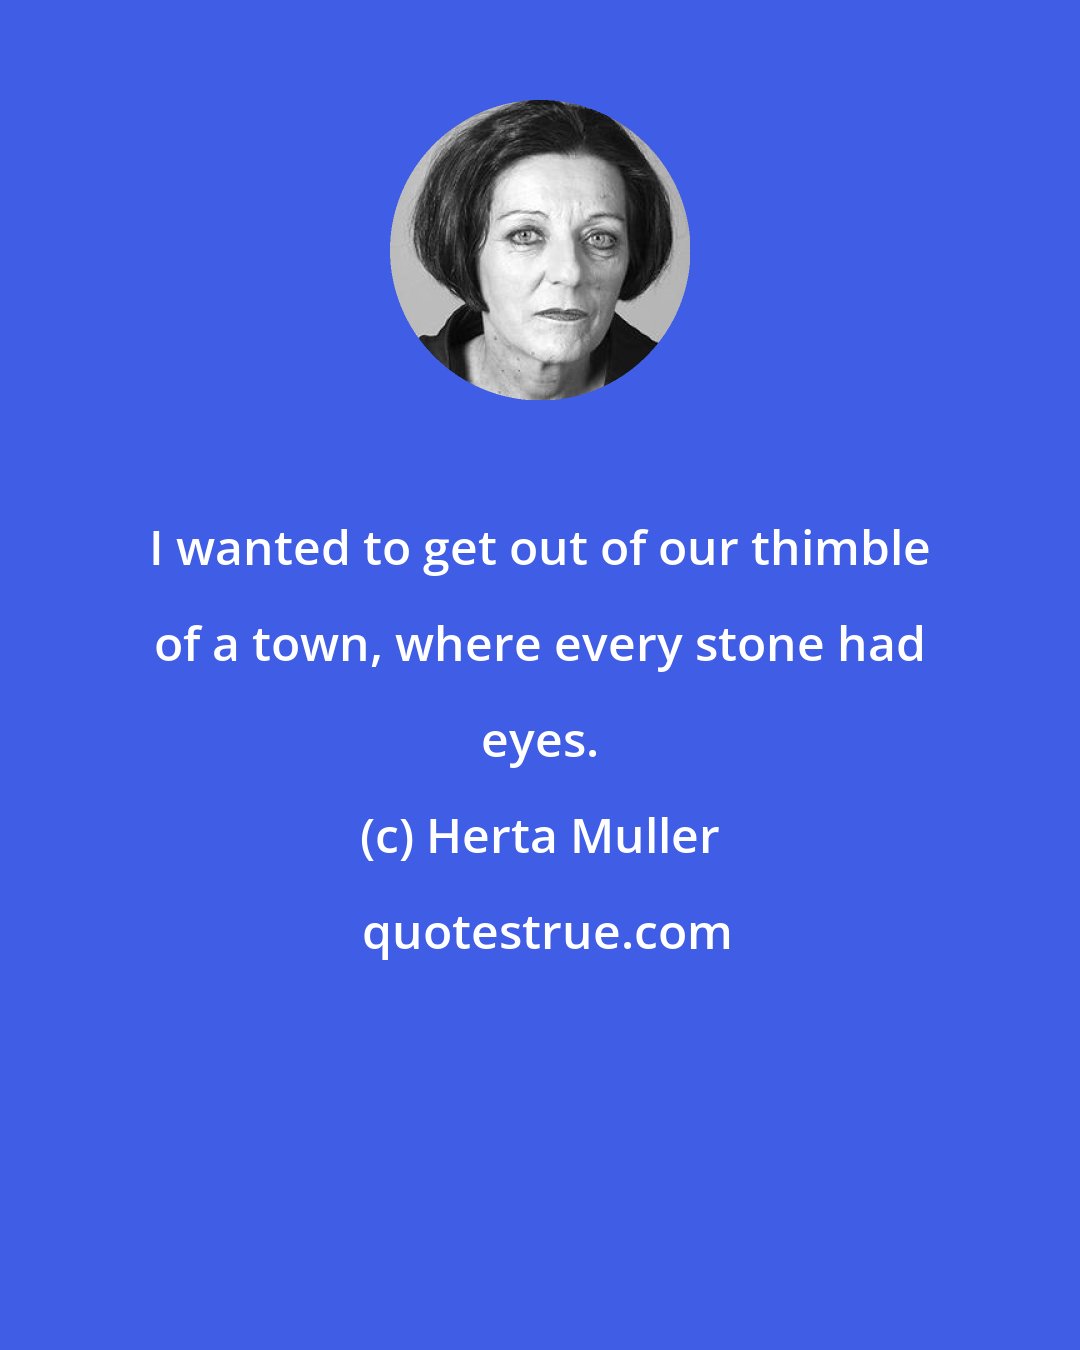 Herta Muller: I wanted to get out of our thimble of a town, where every stone had eyes.